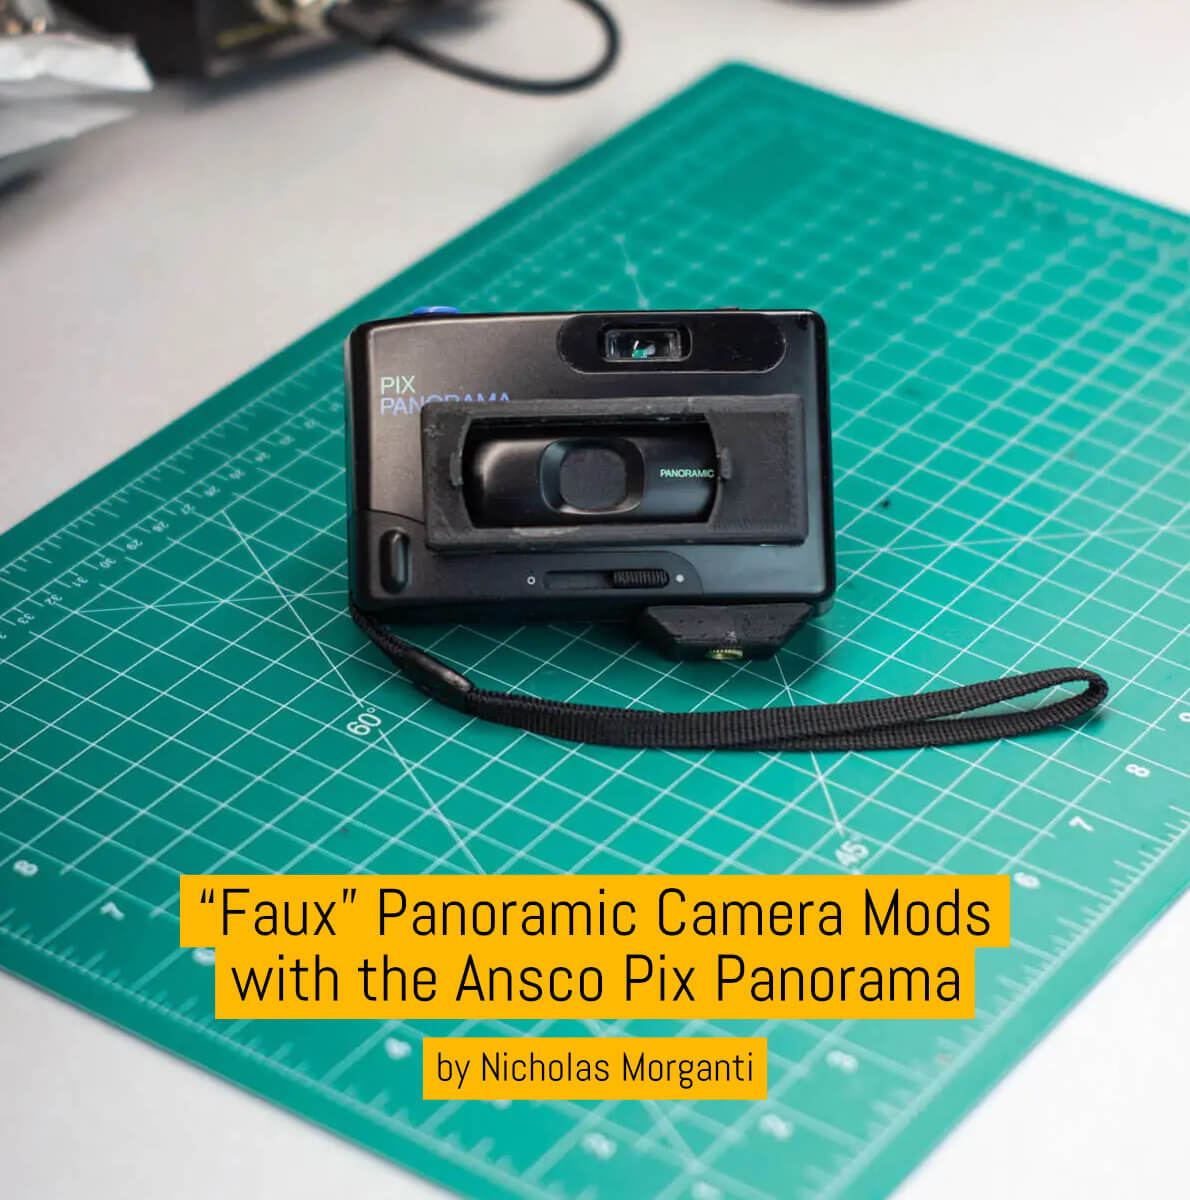 “Faux” Panoramic Camera Mods with the Ansco Pix Panorama